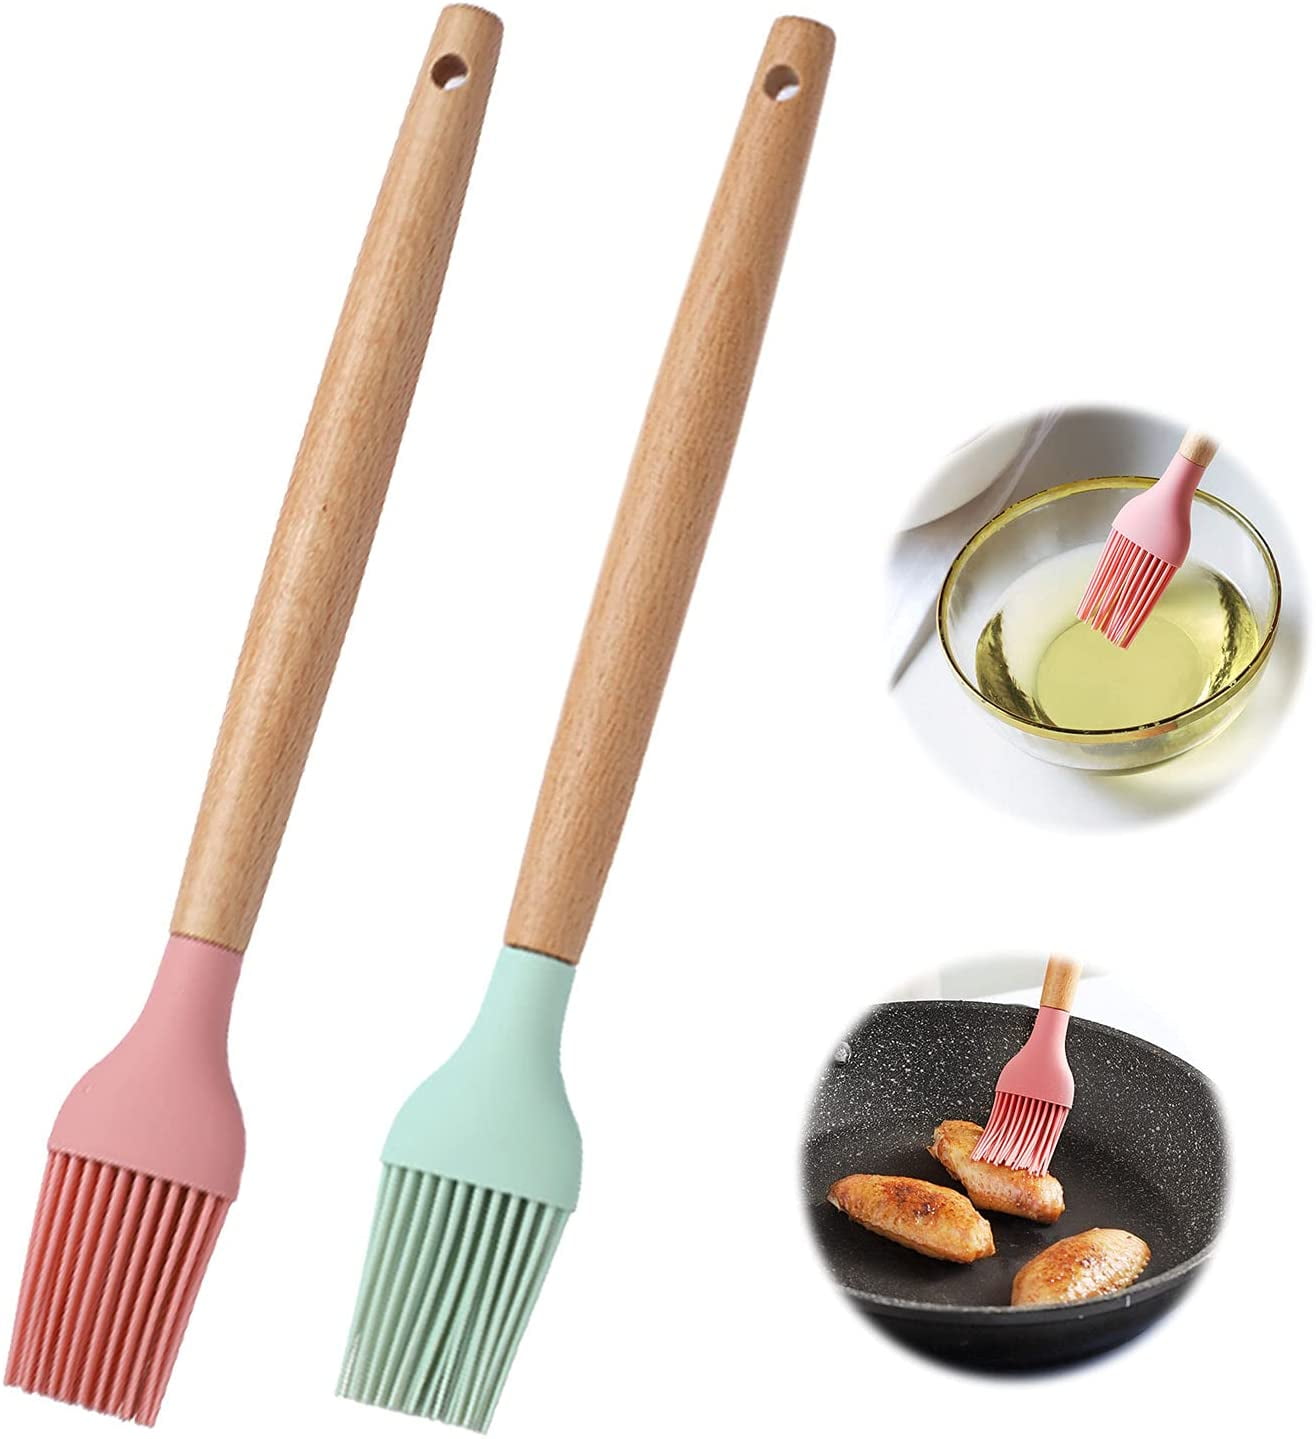 6 Pc Silicone Pastry Basting Brush Set Baking Bakeware Oil Cream Heat Resistant BBQ Tool Silicone 2 